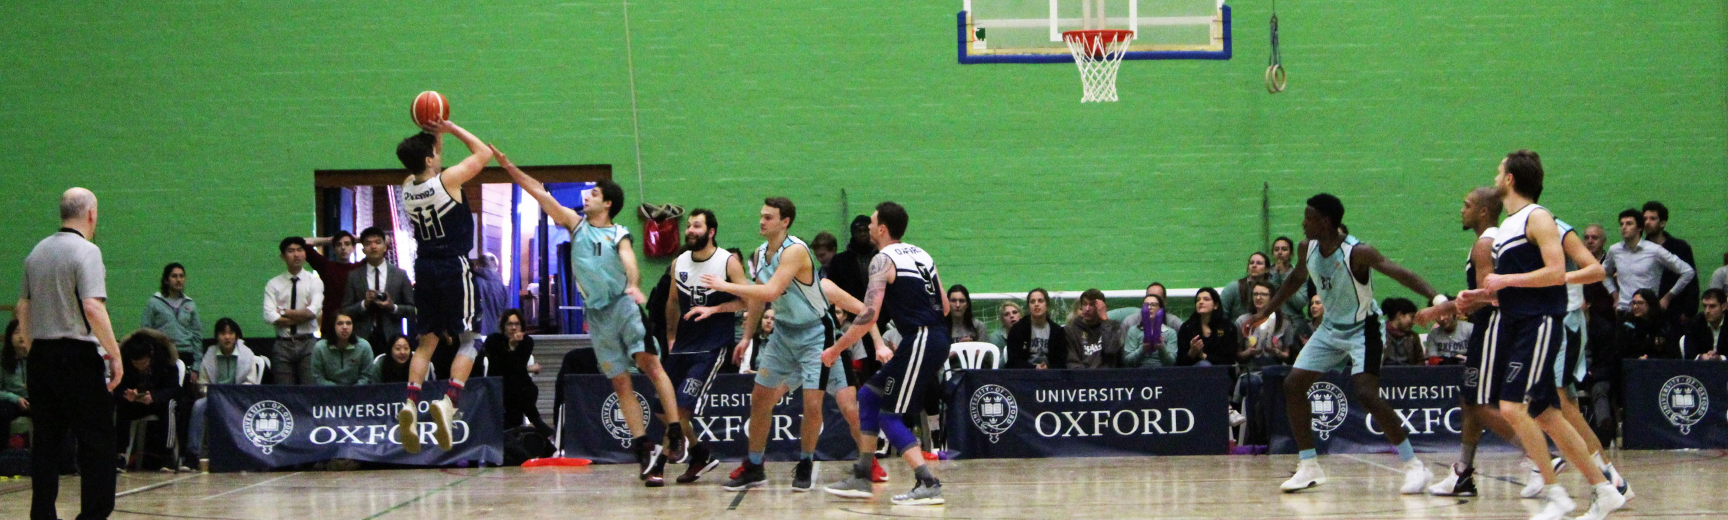 Men playing basketball in the Oxford vs Cambridge Varsity match, with a crowd watching from behind the basket